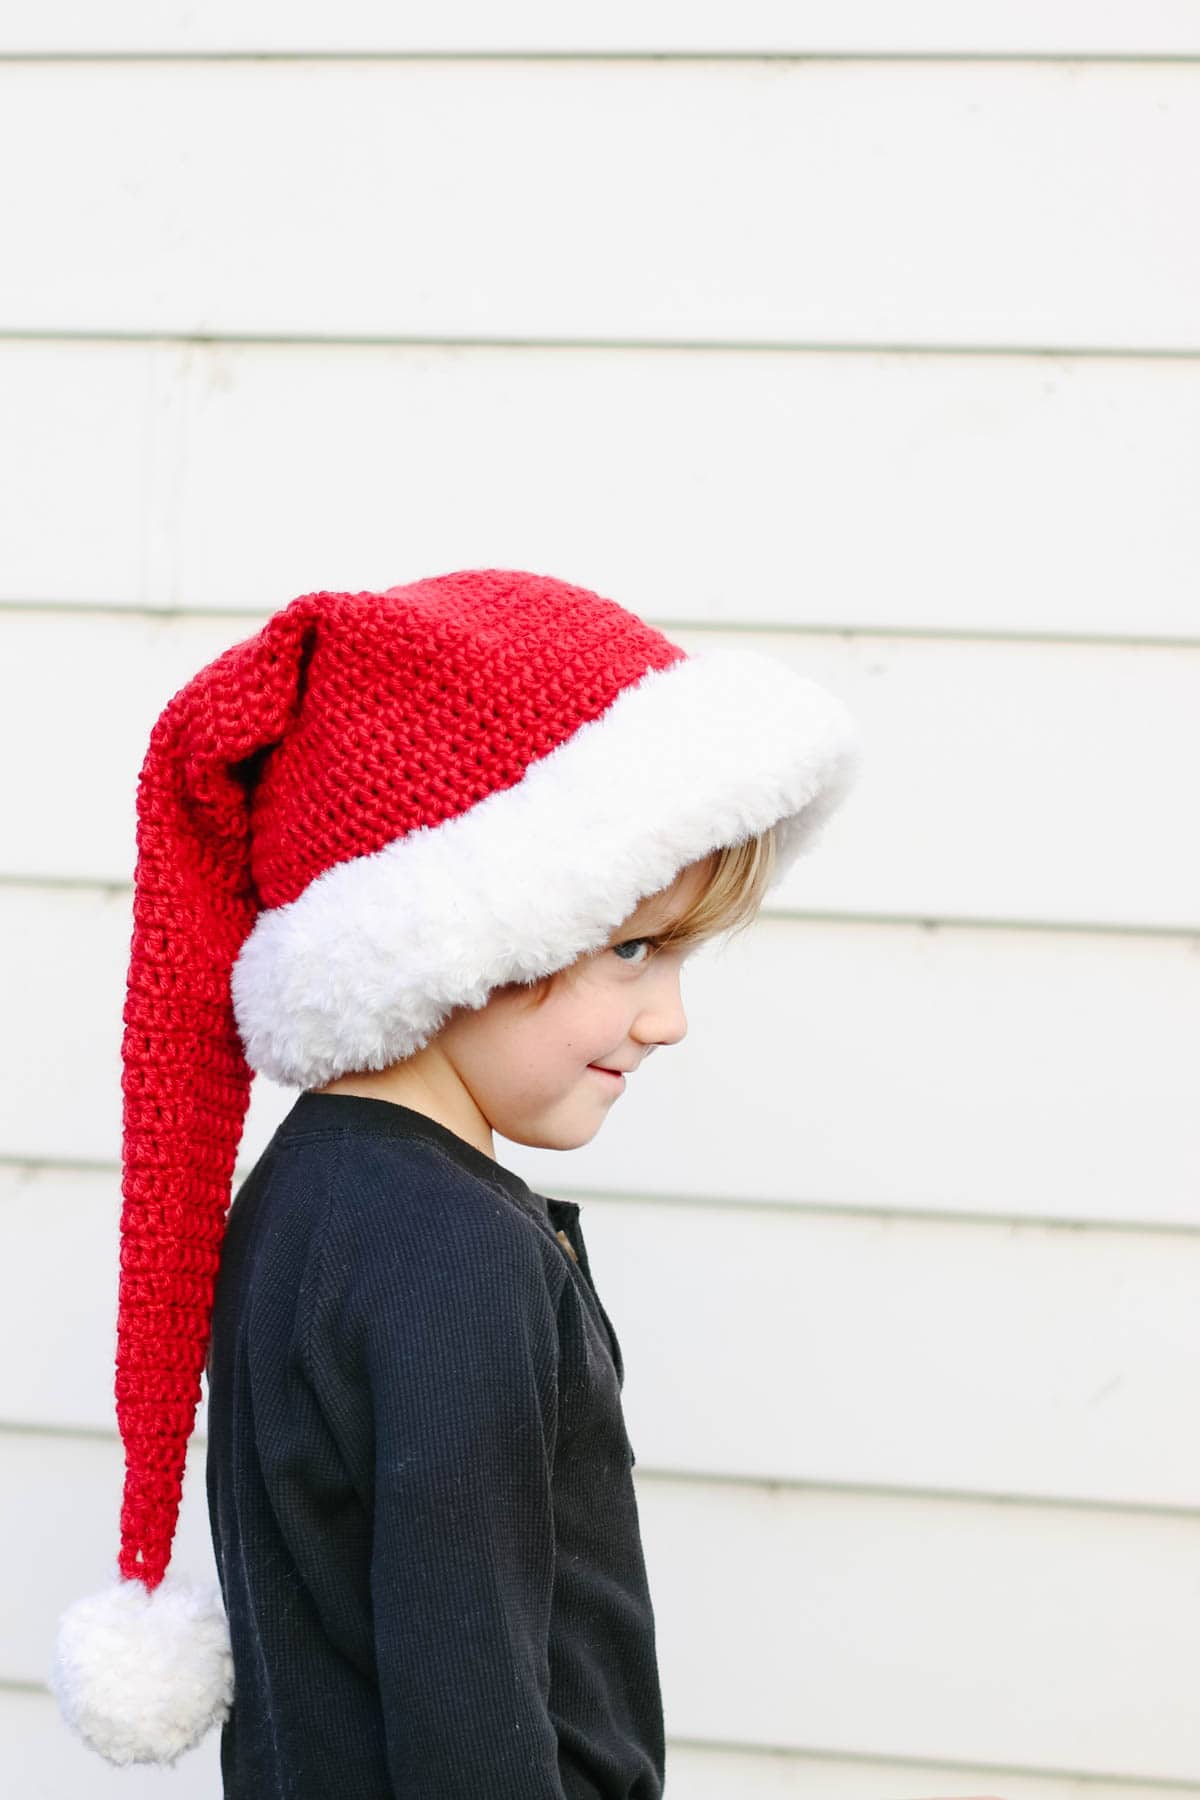 Crocheted Santa Claus hat on a young child.